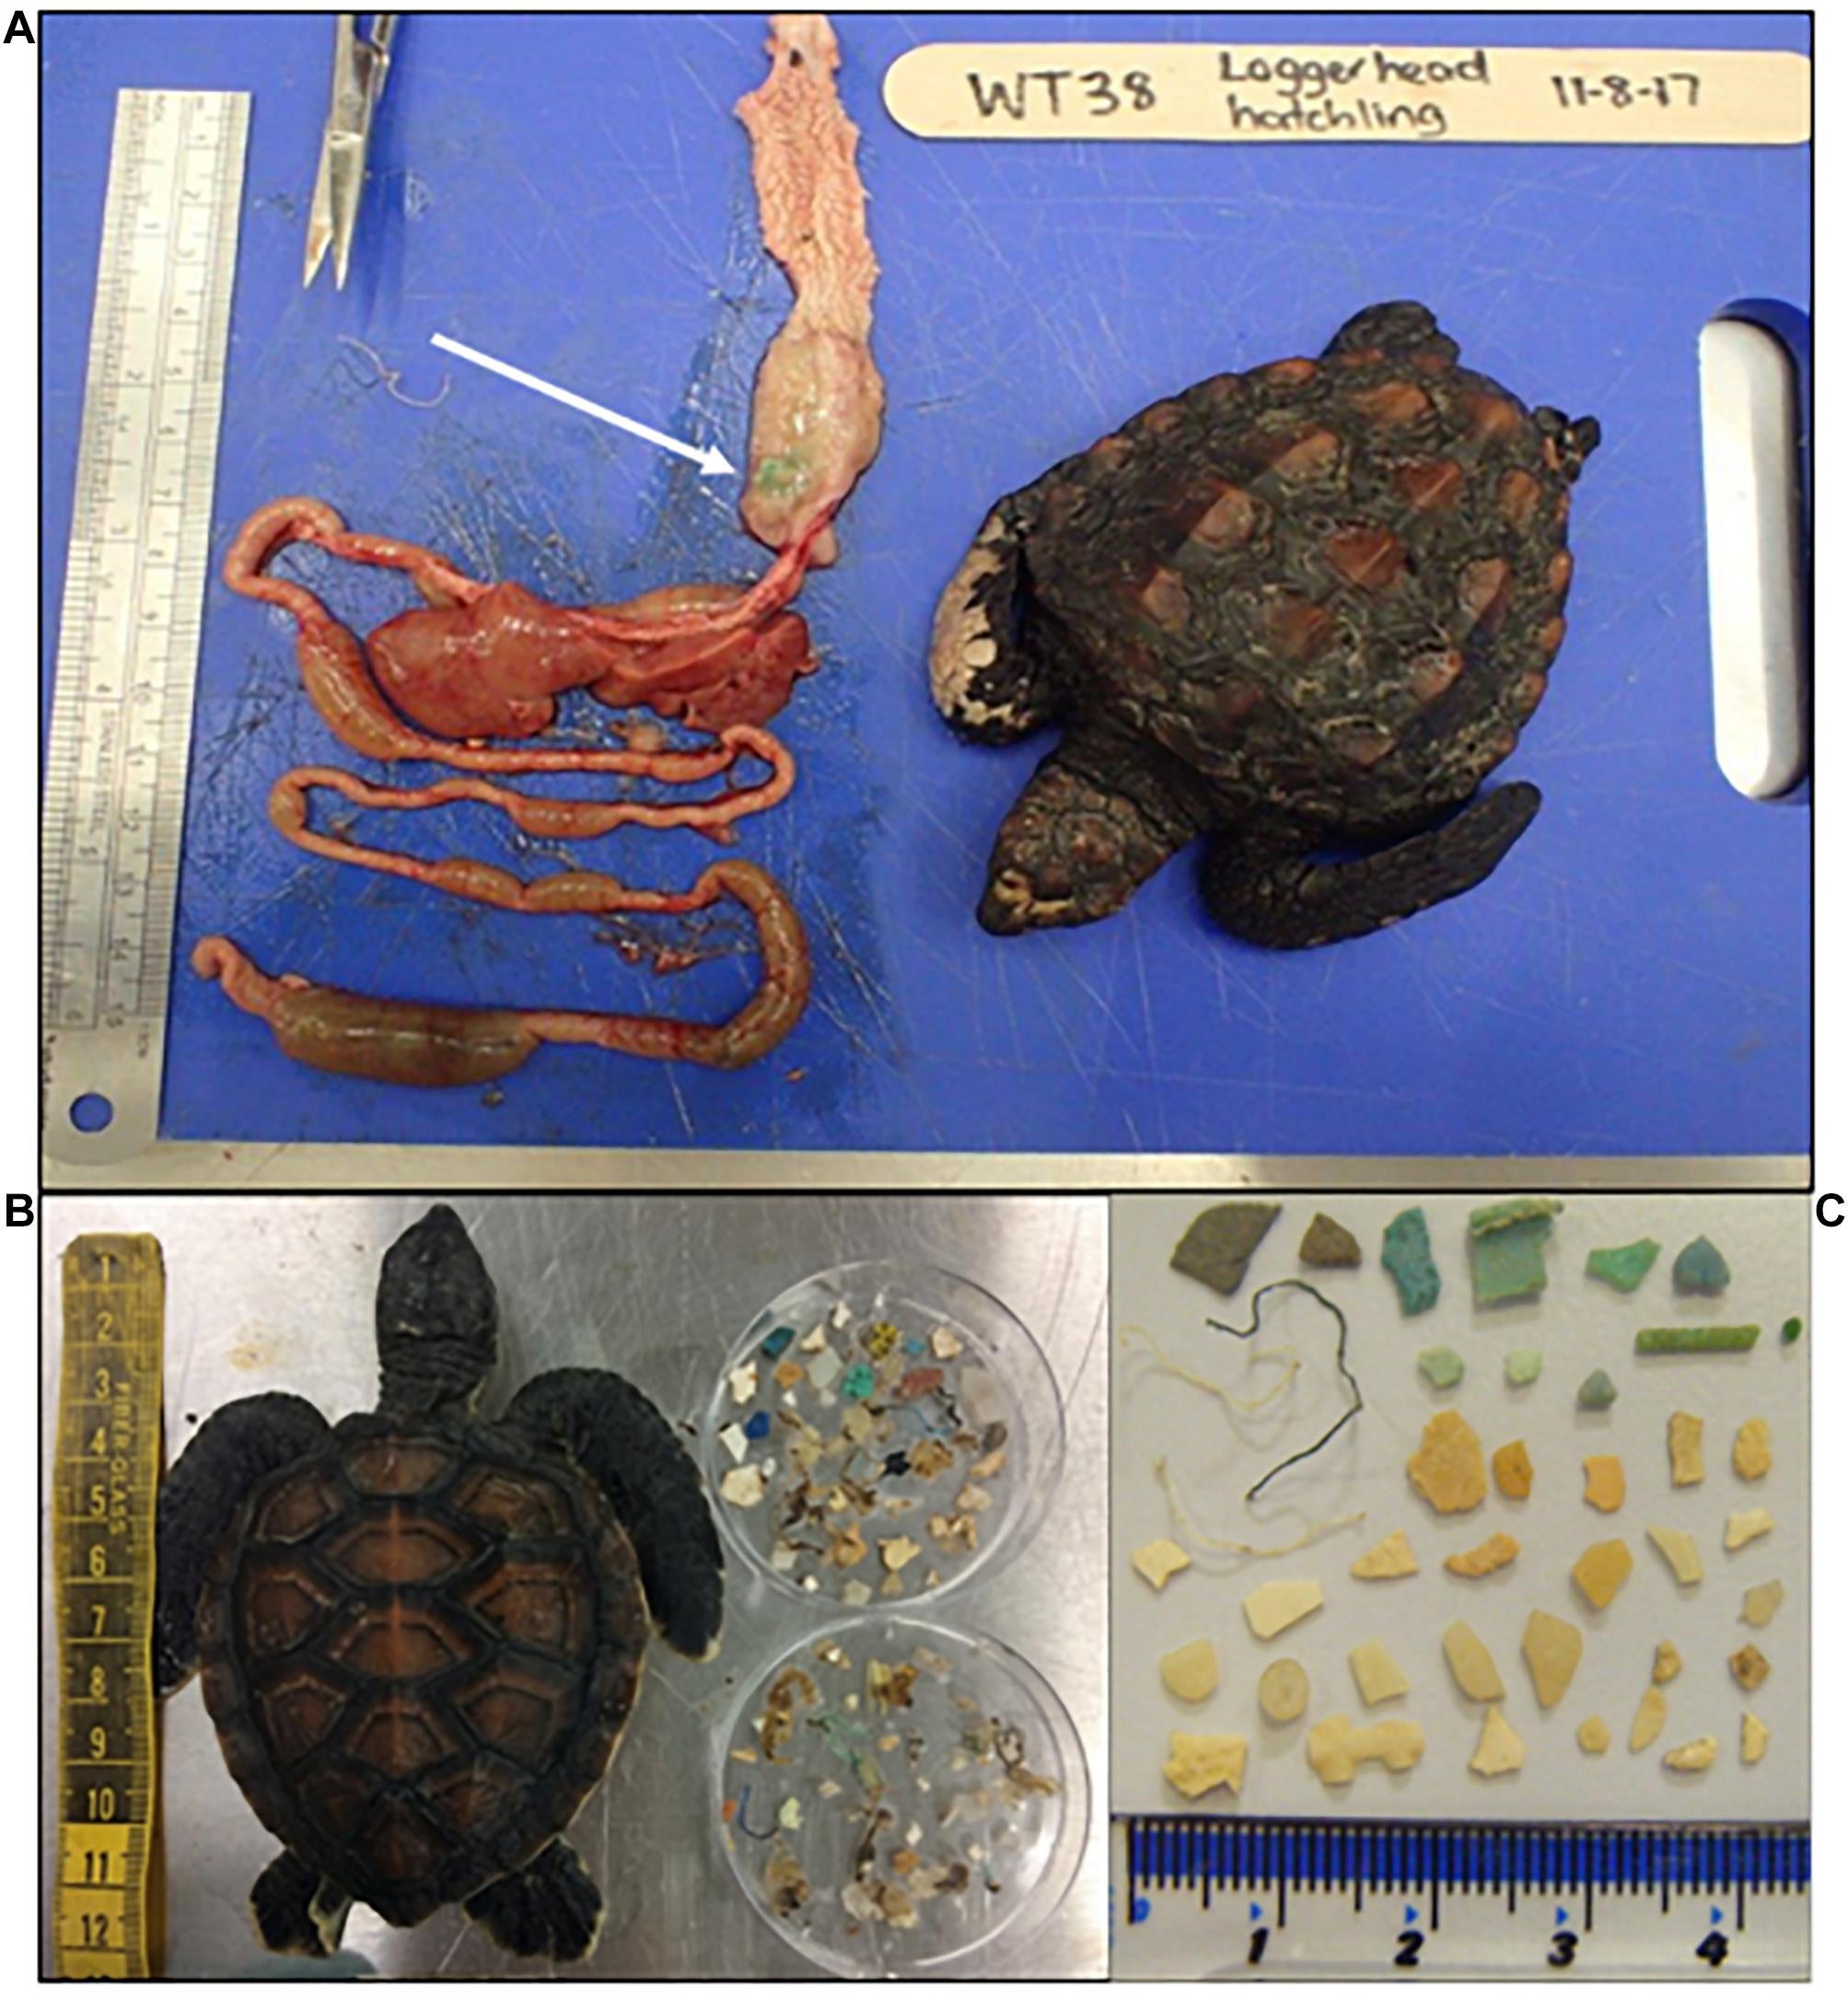 Baby Turtles Are Eating a Disturbing Amount of Plastic